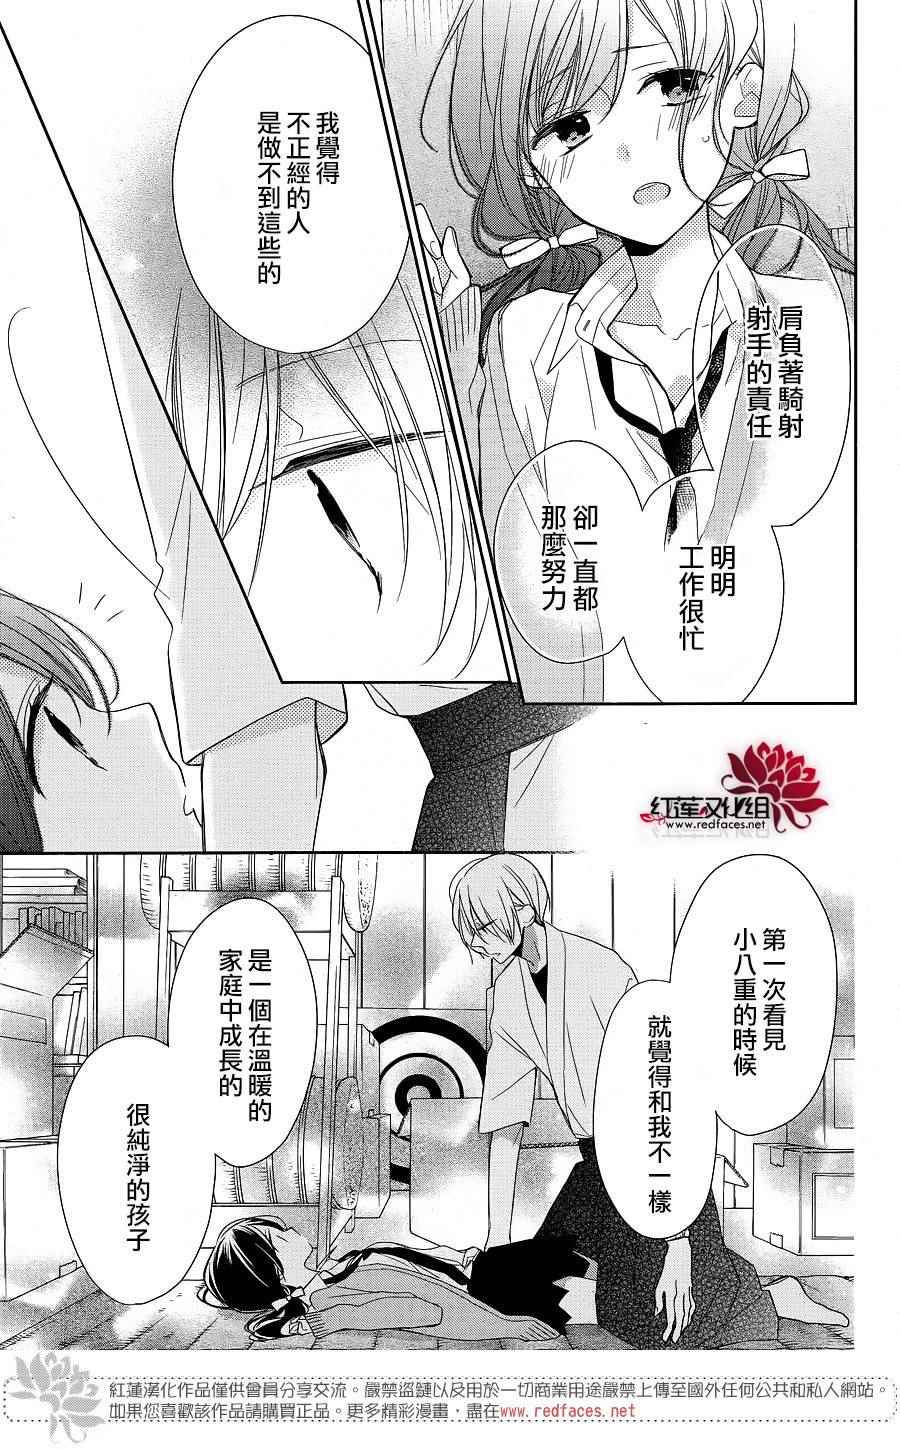 《If given a second chance》漫画 second chance 008话